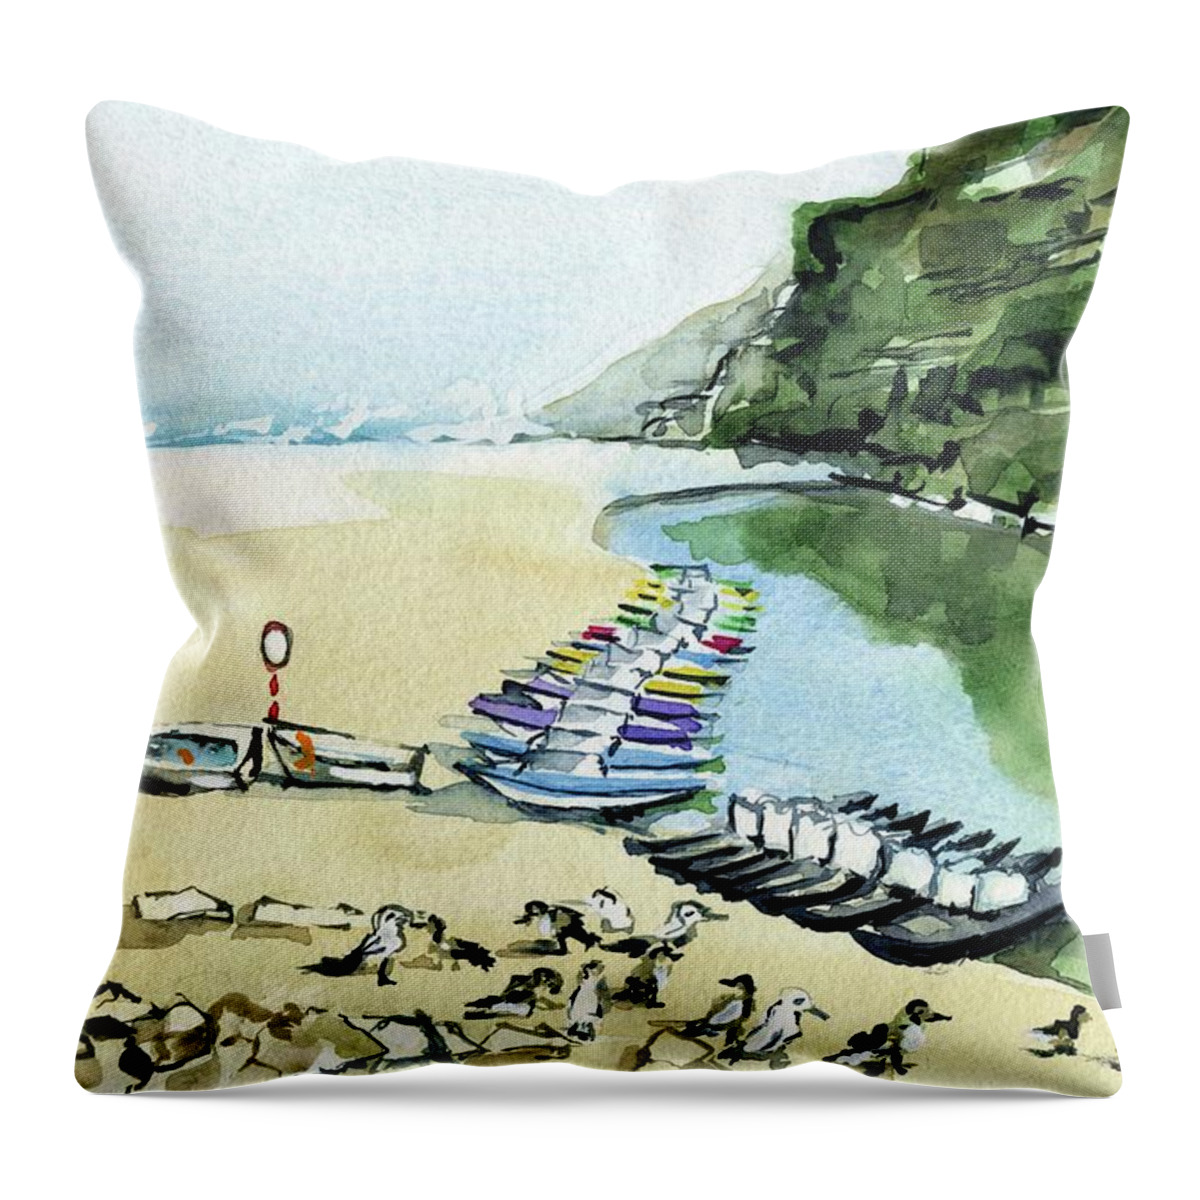 Portugal Throw Pillow featuring the painting Morning At Porto Novo Beach by Dora Hathazi Mendes